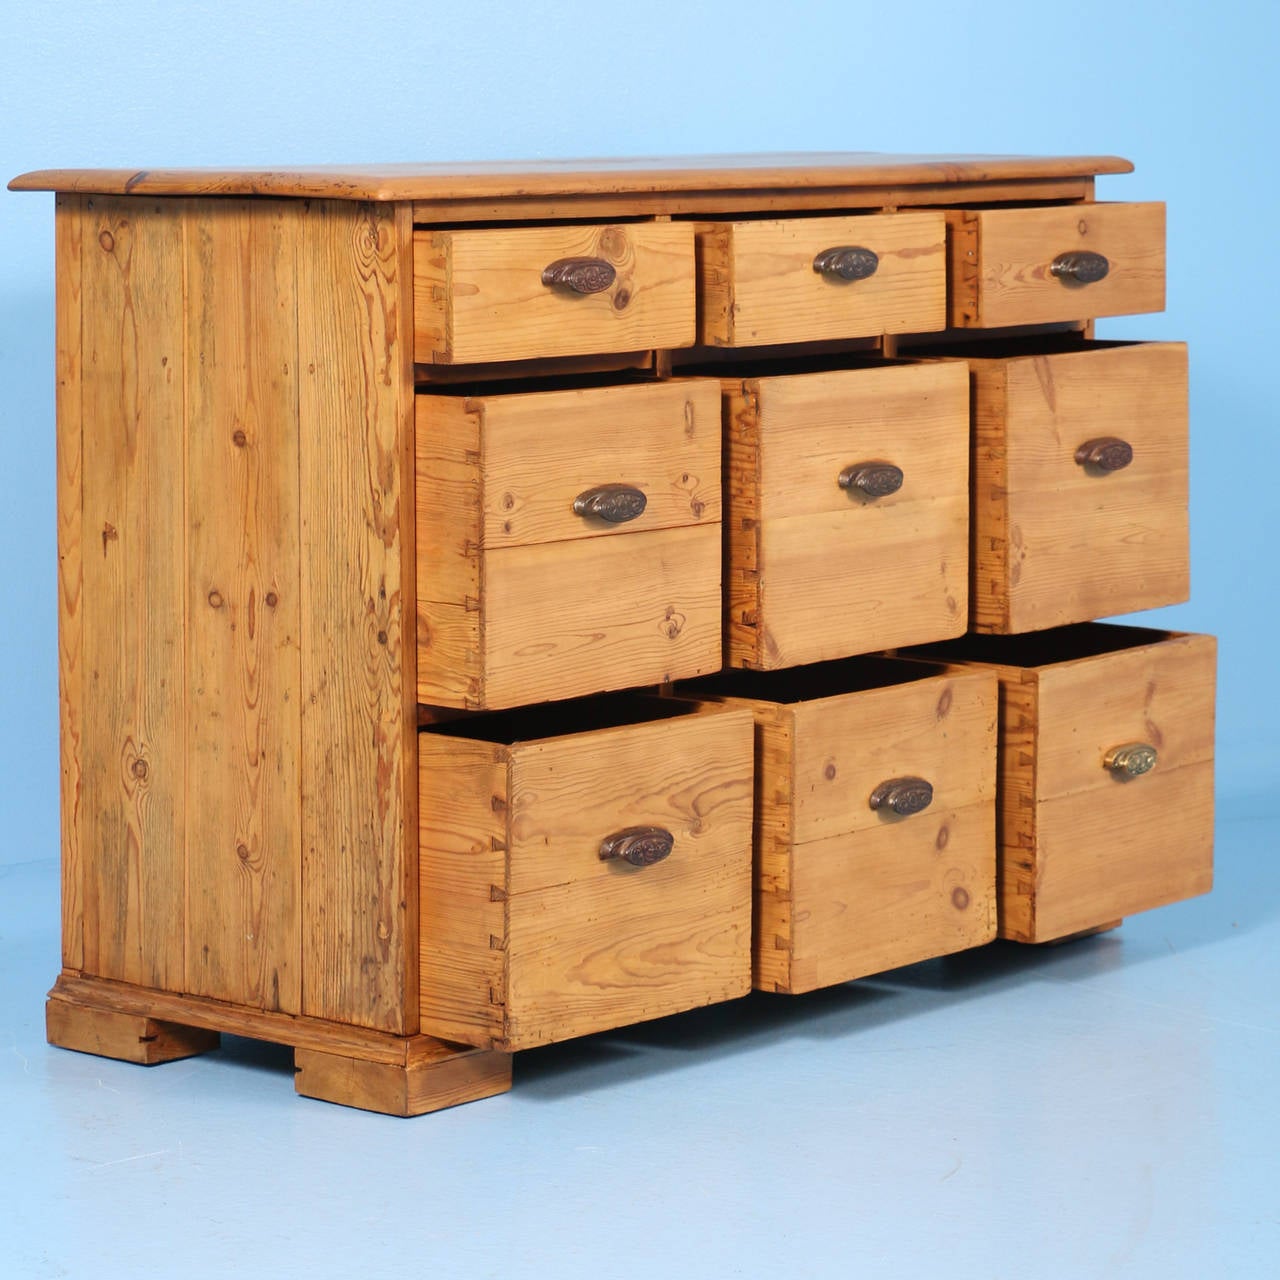 This wonderful chest of nine drawers (six square drawers and three smaller drawers on top) likely served as as small shop counter for display/storage in the mid-1800s of Denmark. While it has the look of an apothecary cabinet, the drawers are